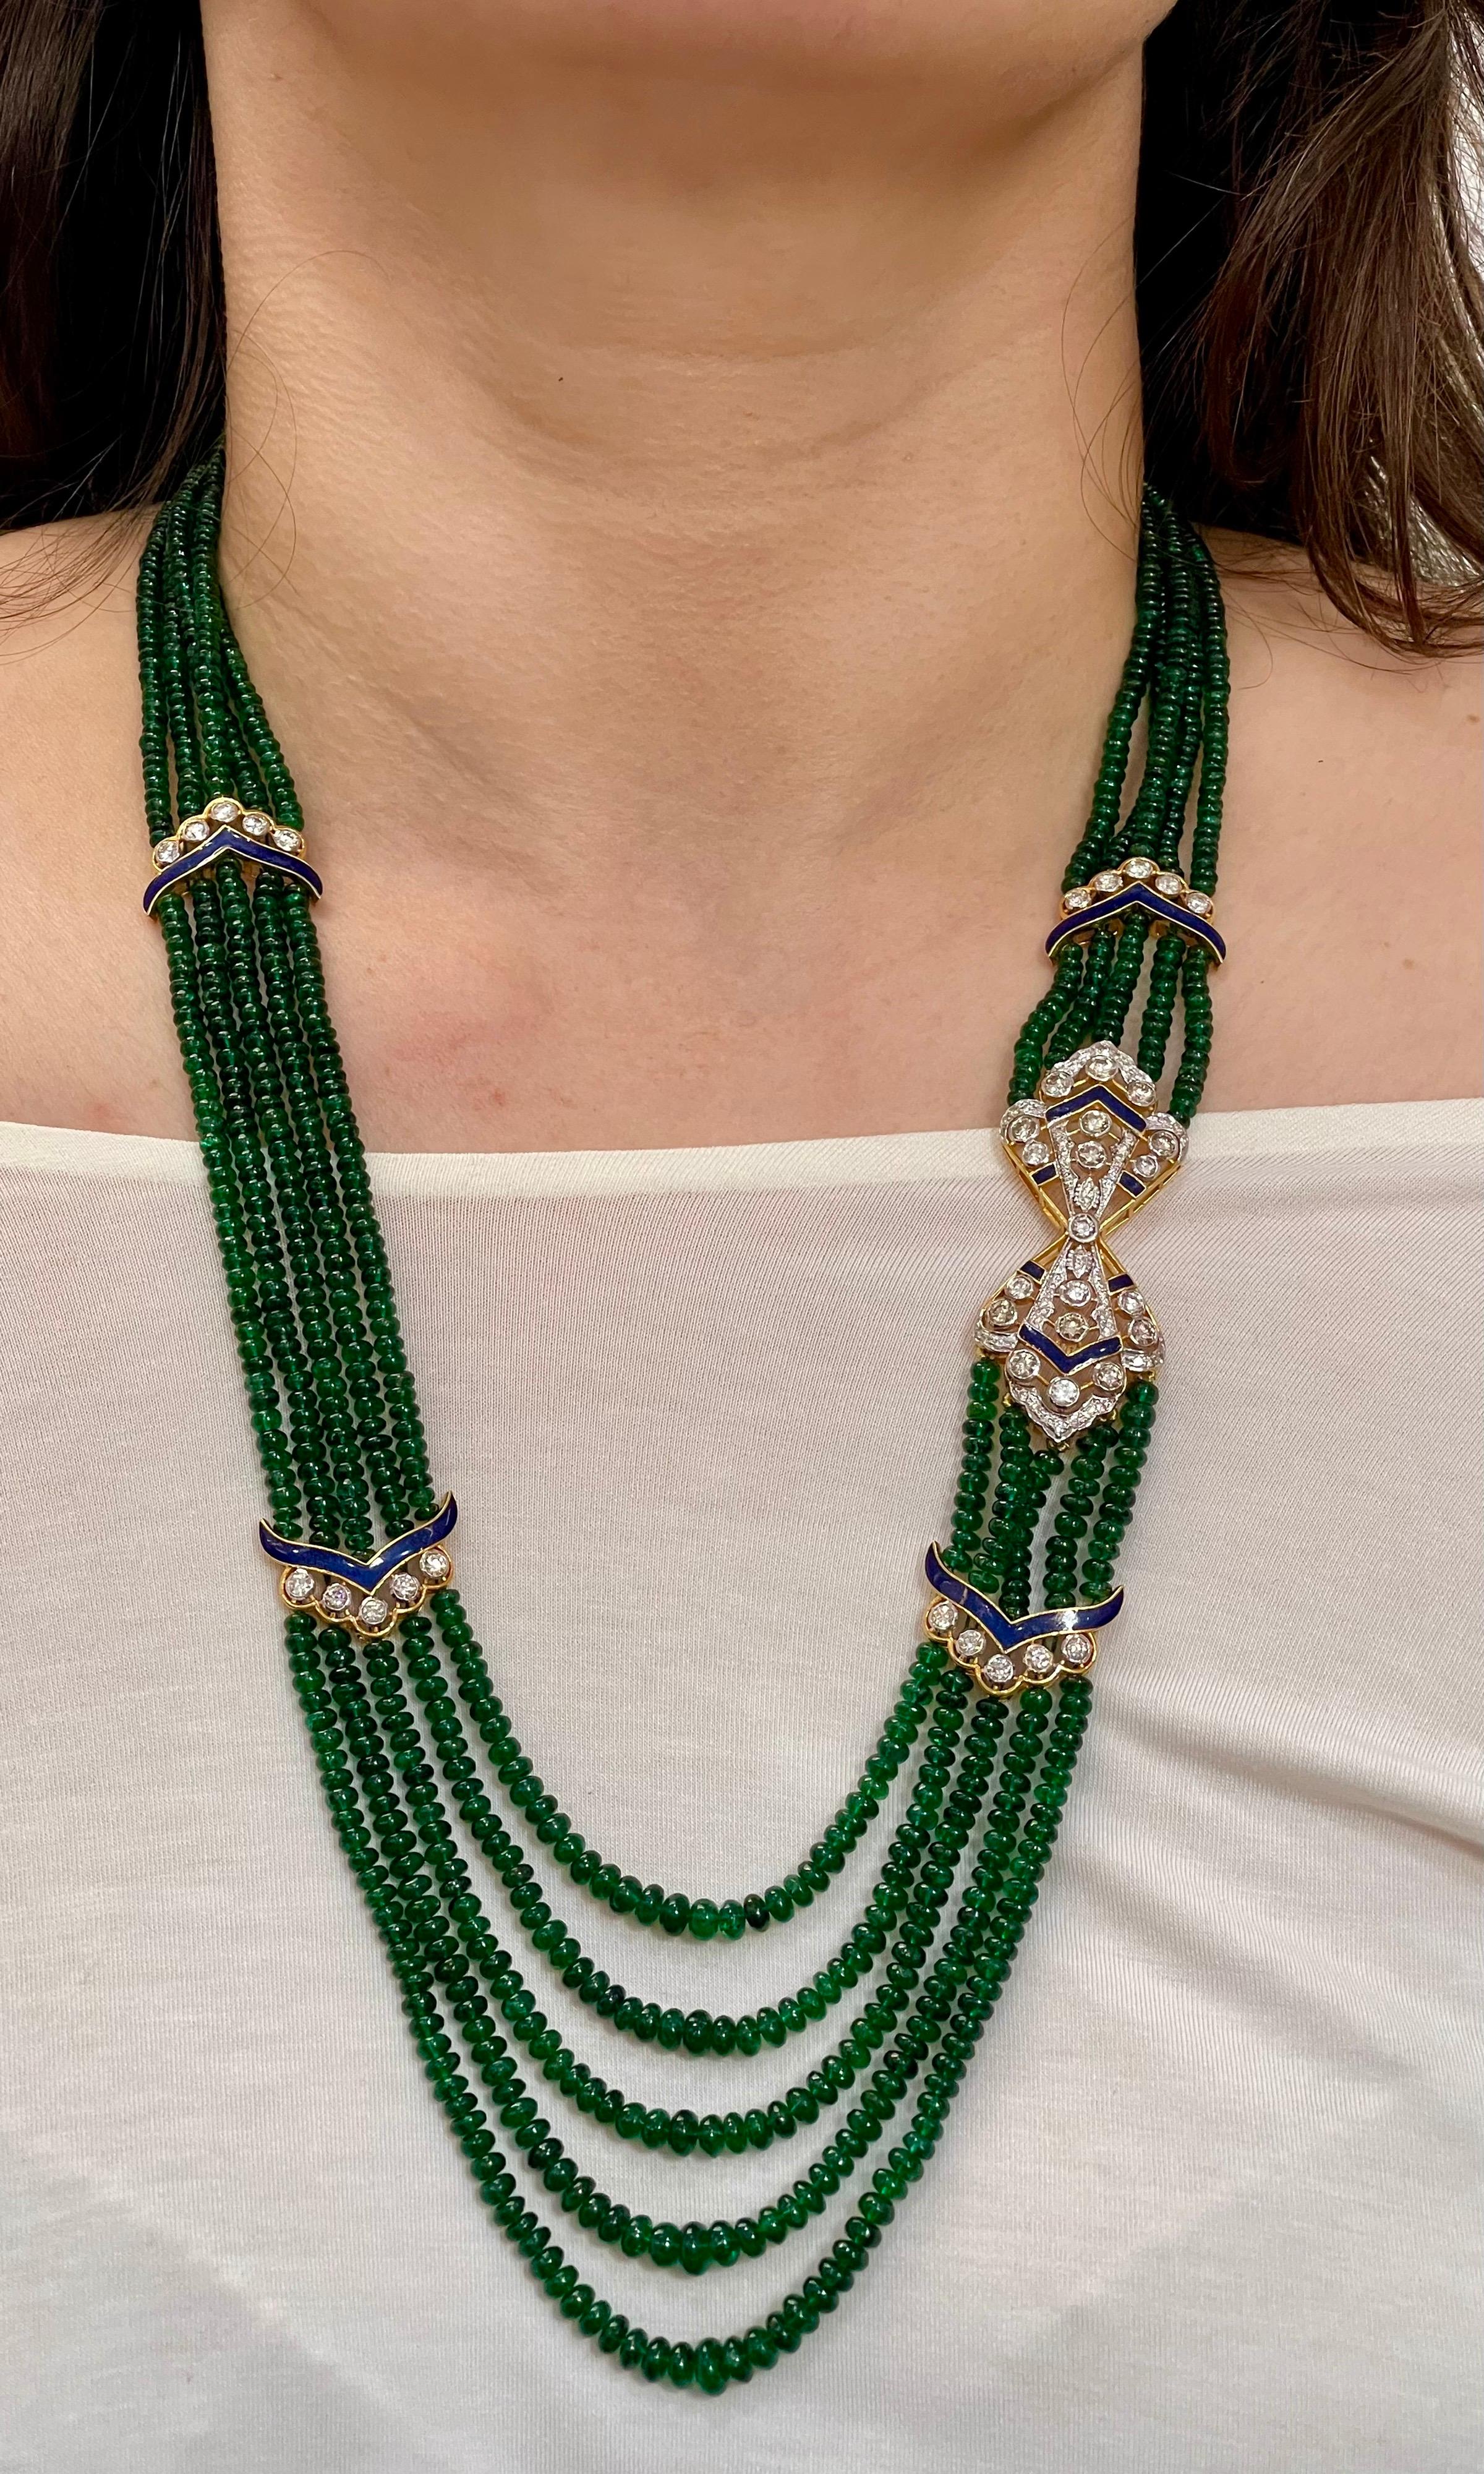 300 Carat 5-Strand Emerald Necklace with 4.8 Carat Diamond & Enamel in 14k Gold For Sale 6